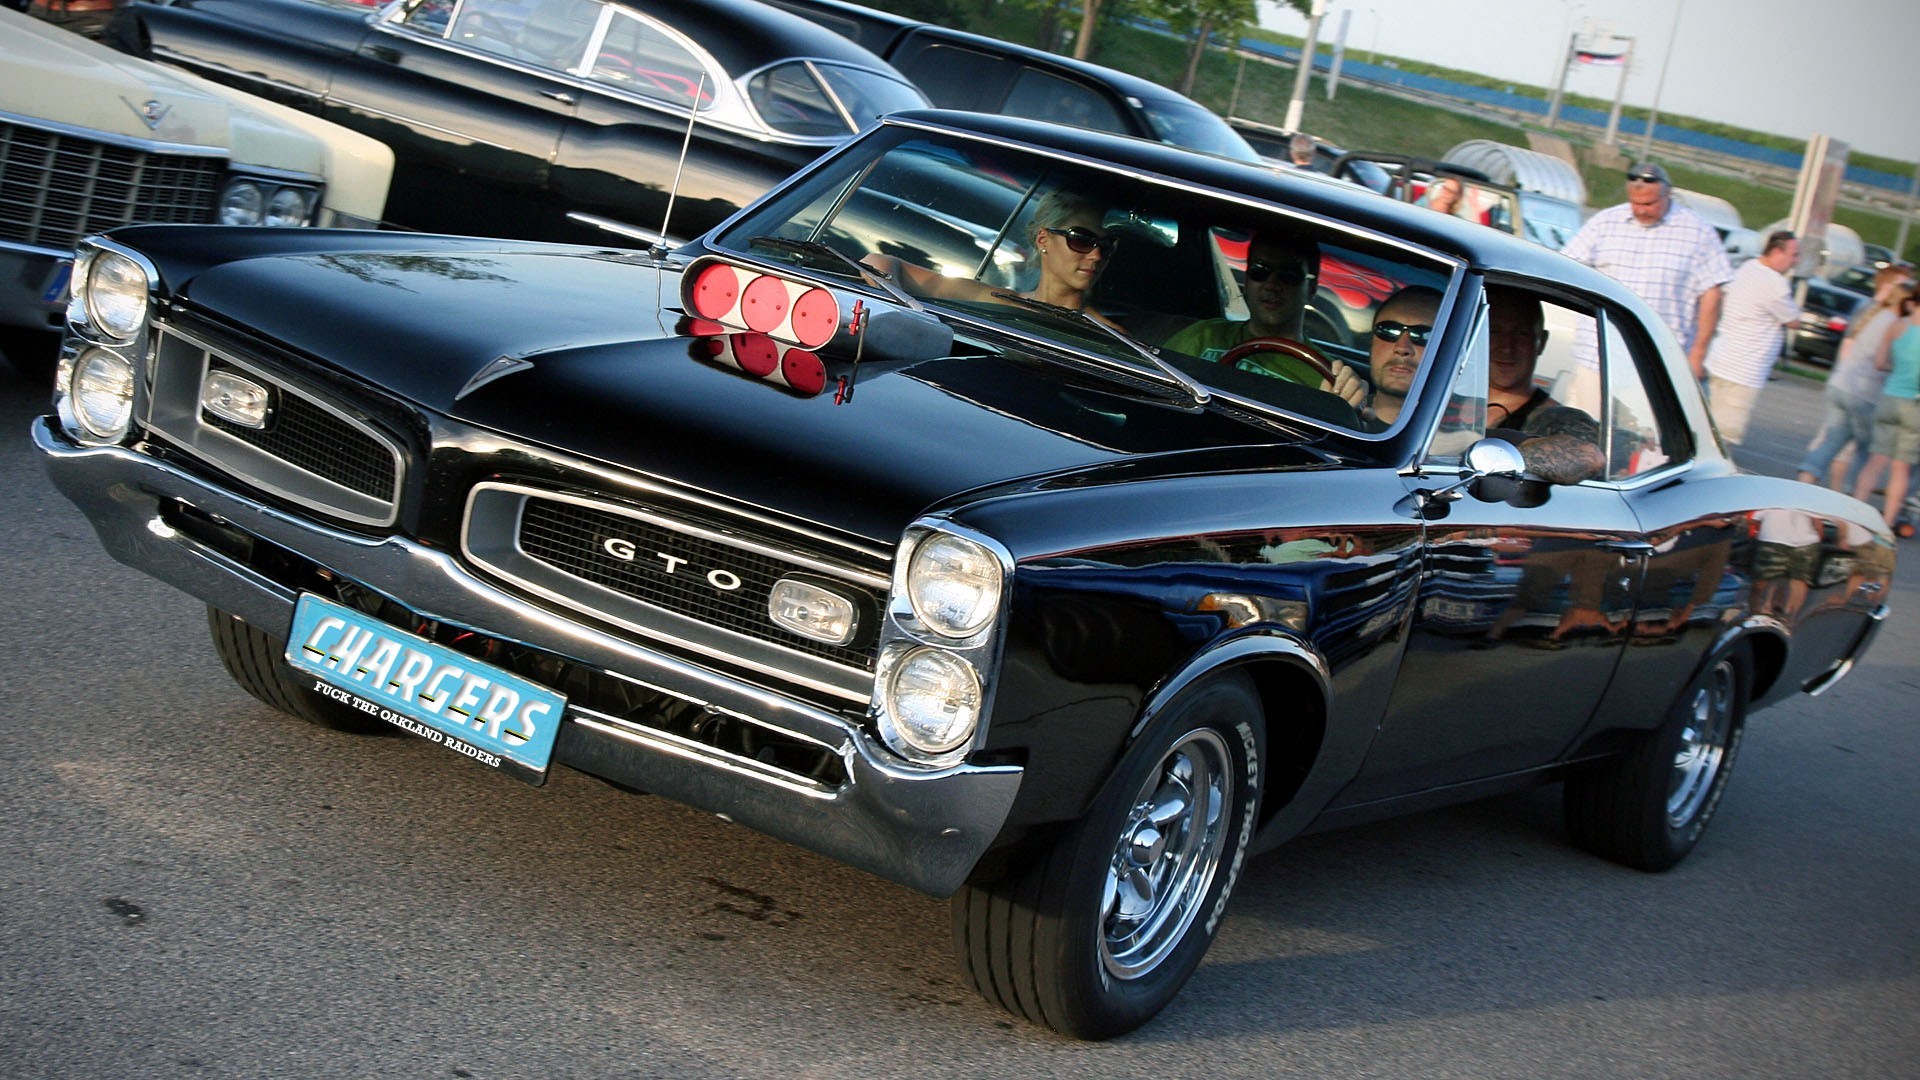 1920x1080 Explore Hd Wallpaper, Wallpapers, and more! Pontiac GTO Blower